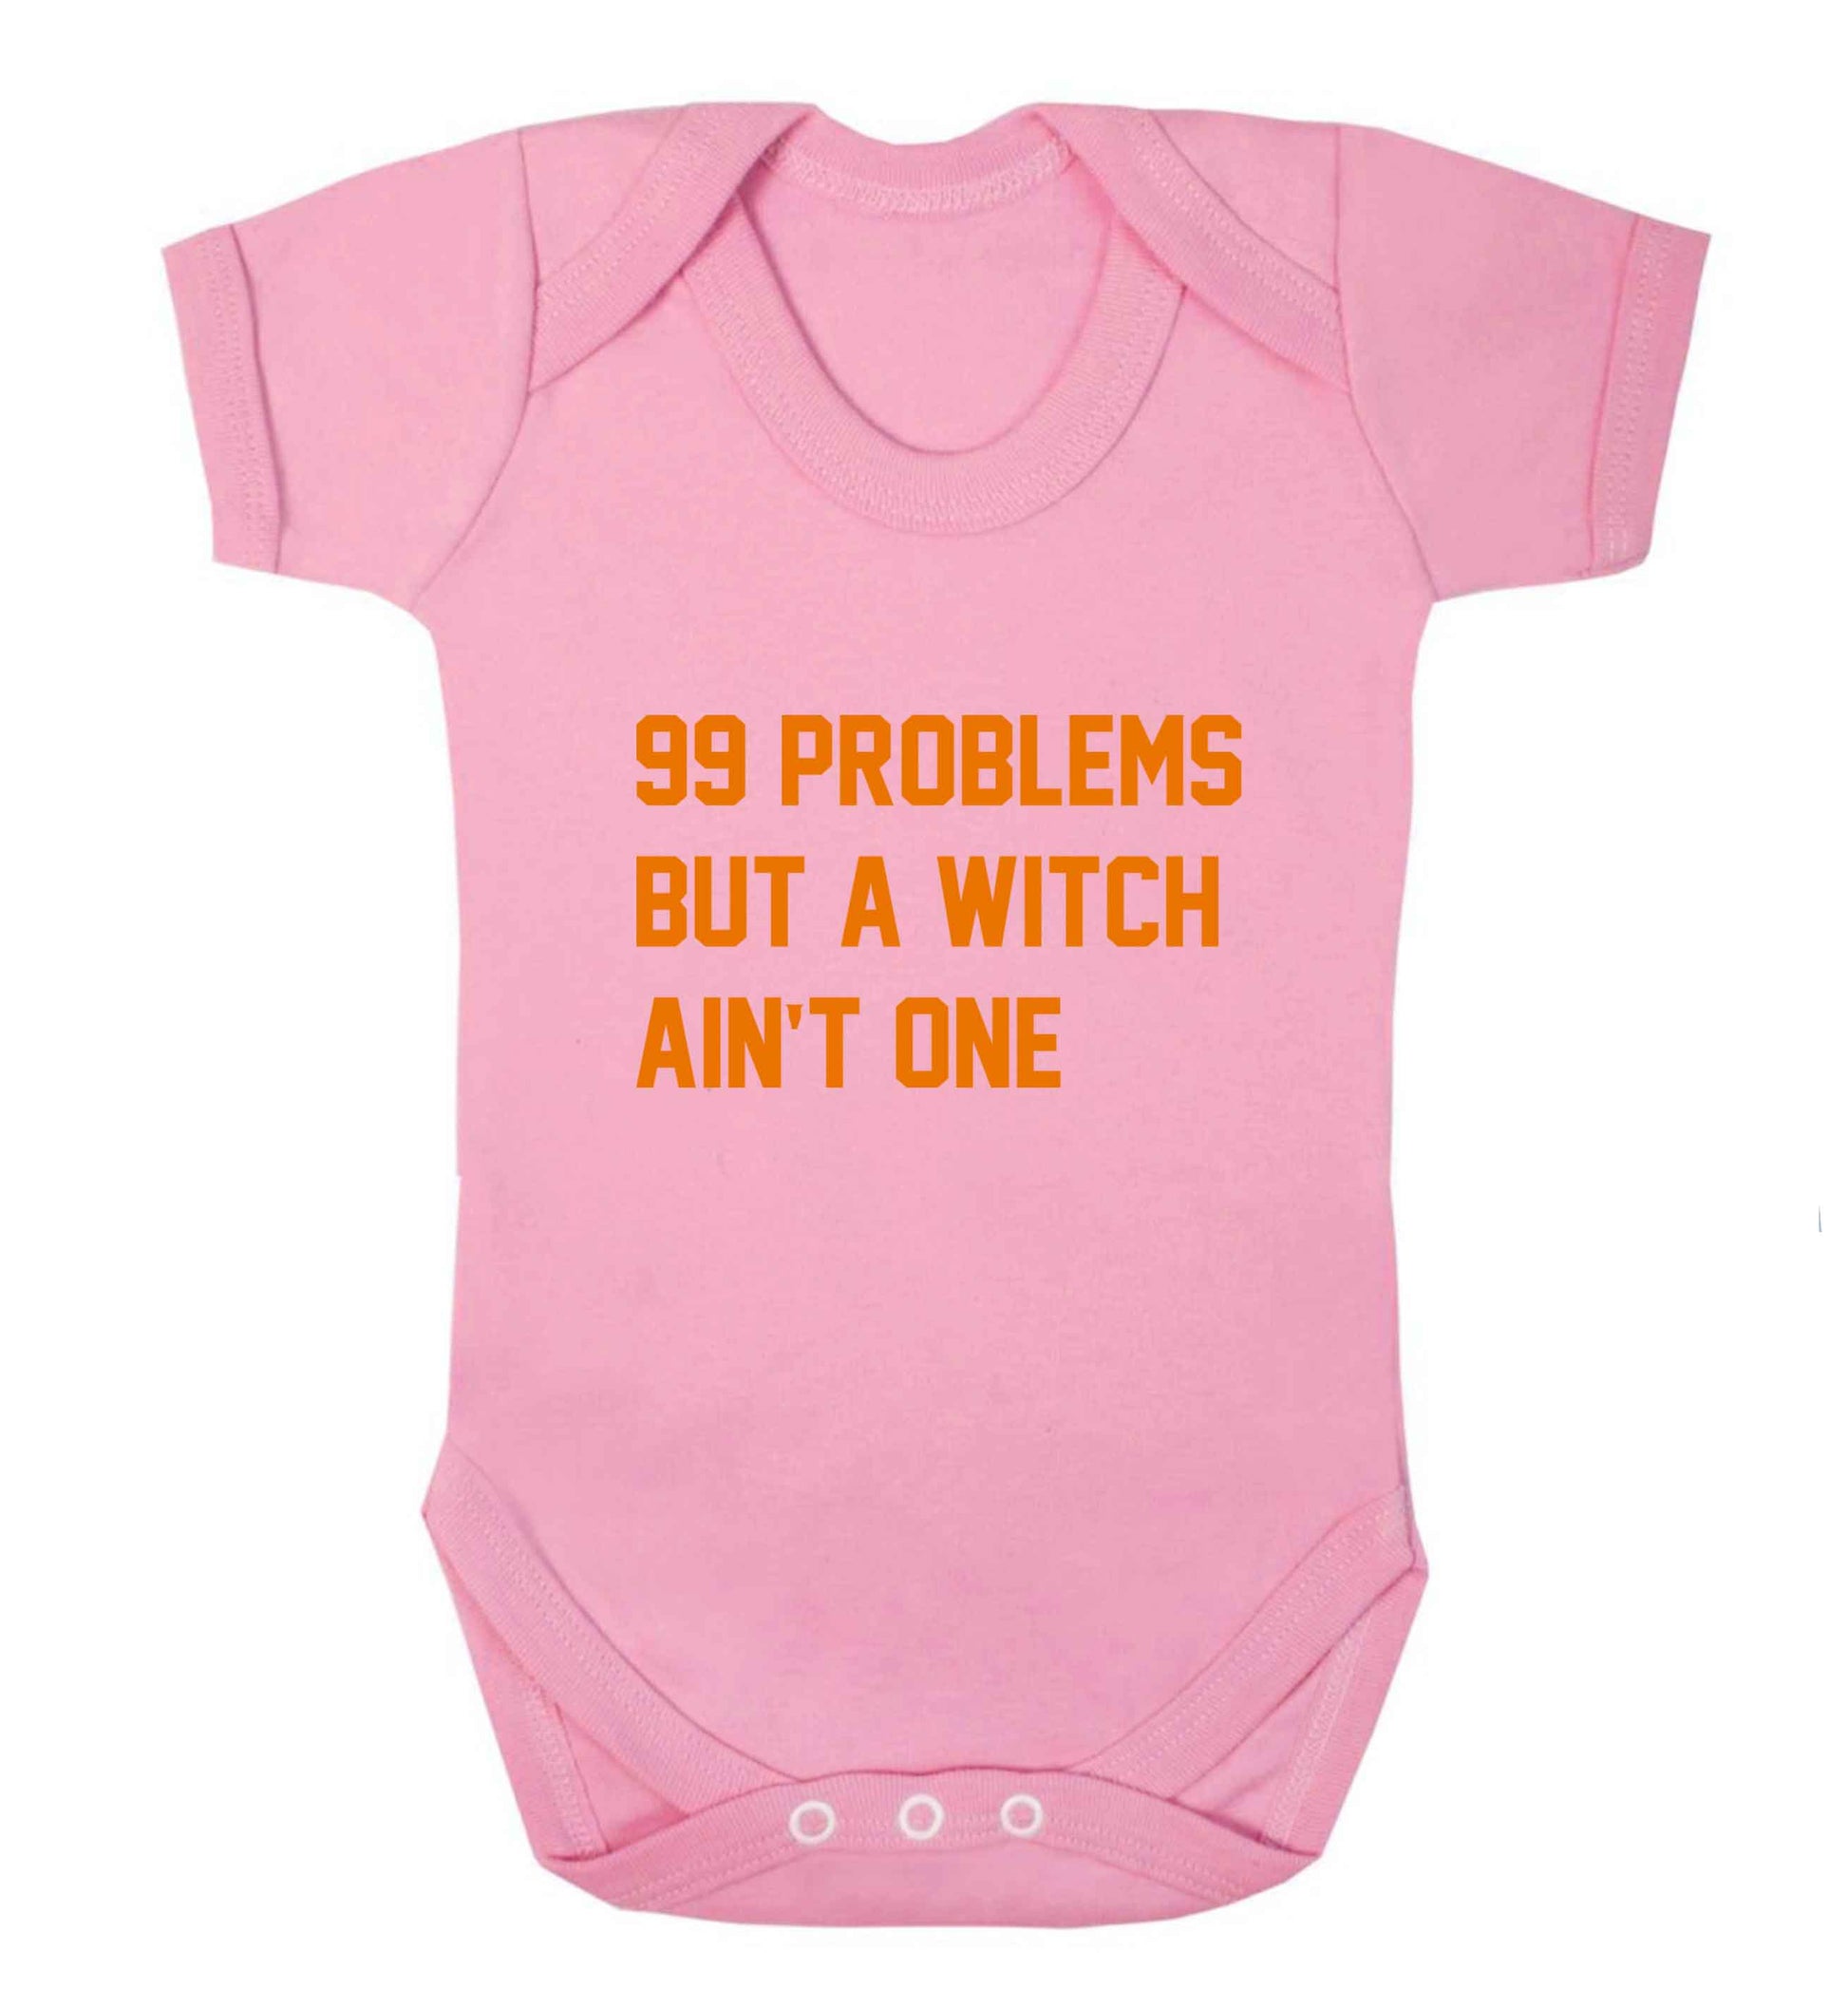 99 Problems but a witch aint one baby vest pale pink 18-24 months